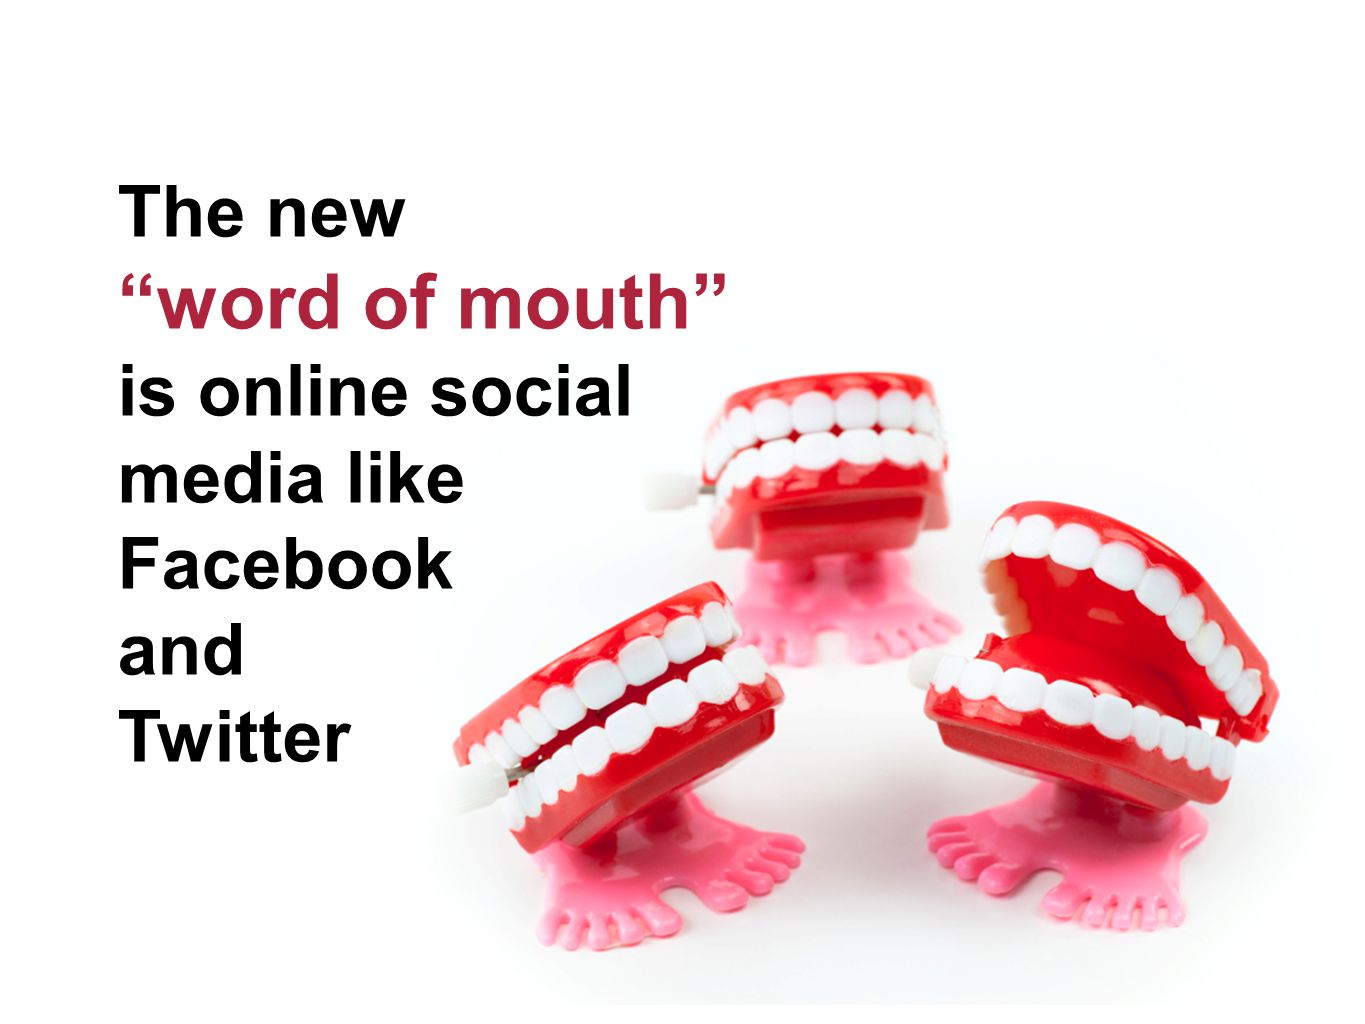 The new word of mouth is online social media like Facebook and Twitter